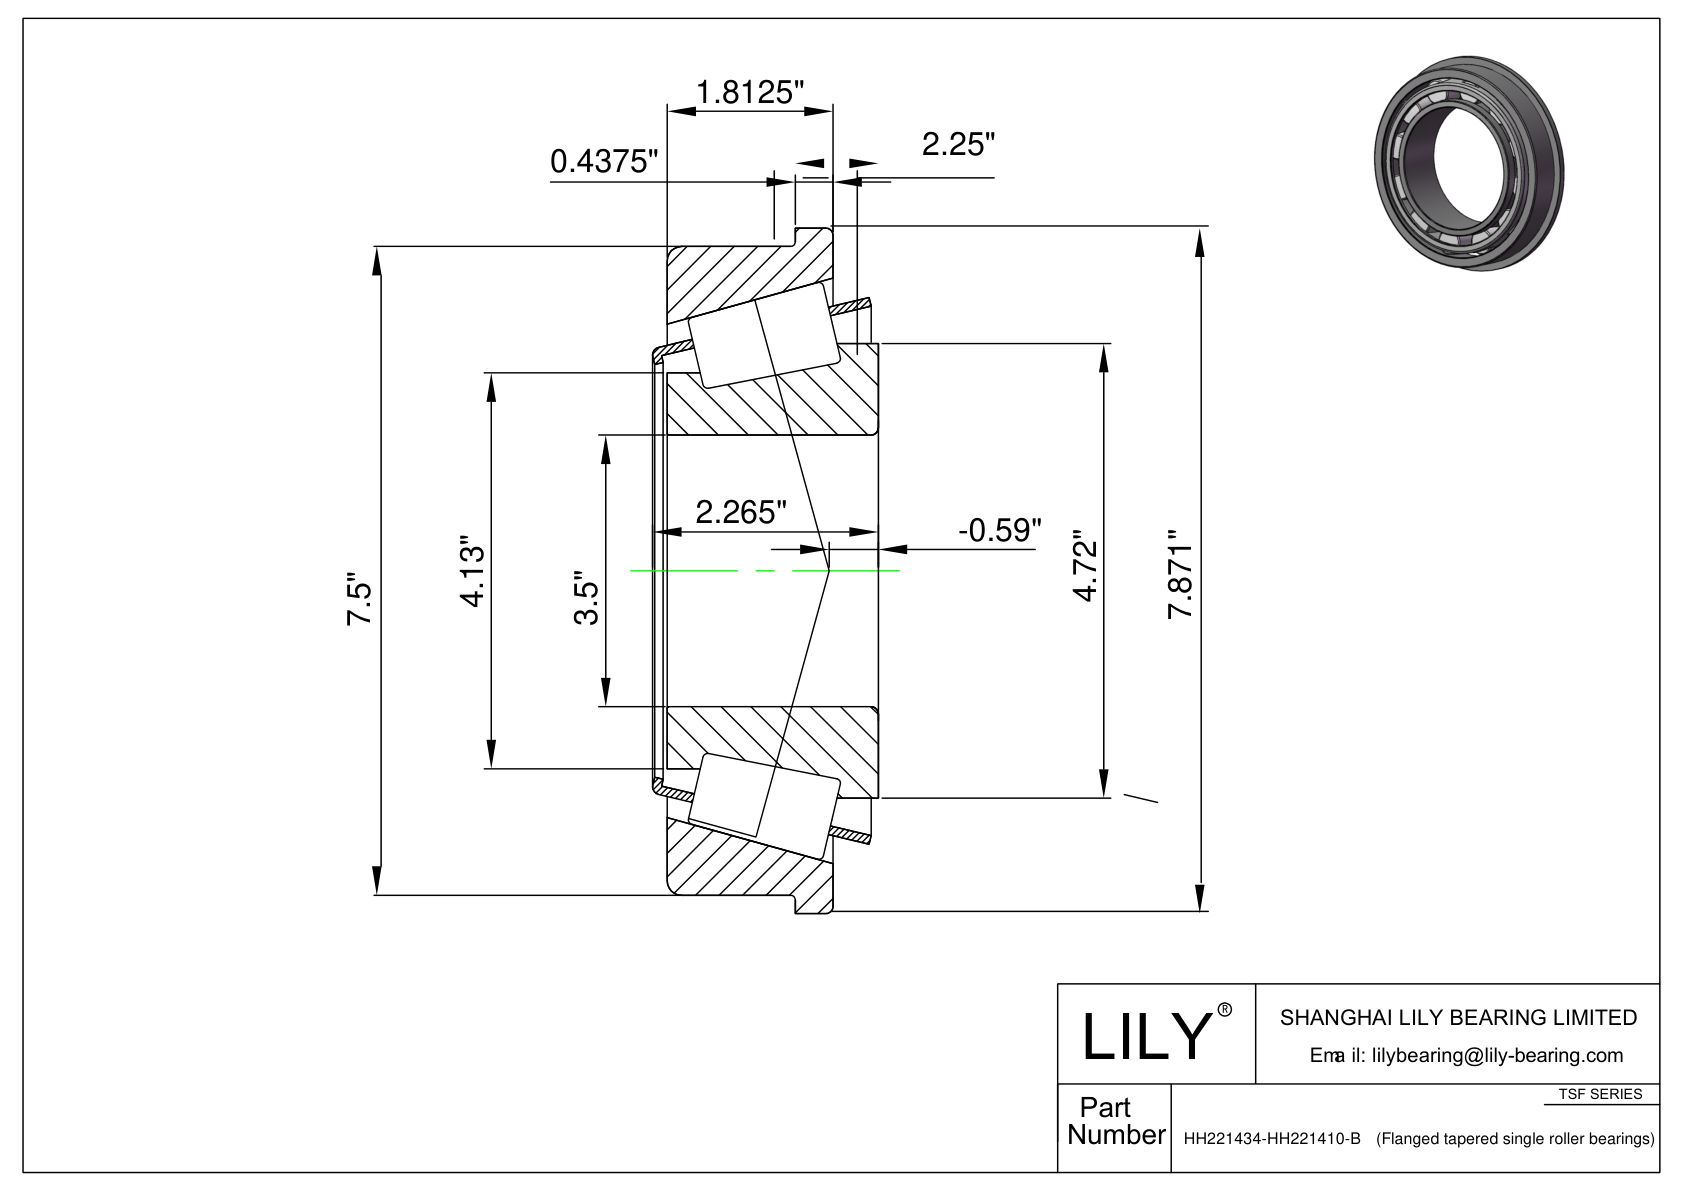 98350-98788-B TSF (Tapered Single Roller Bearings with Flange) (Imperial) cad drawing